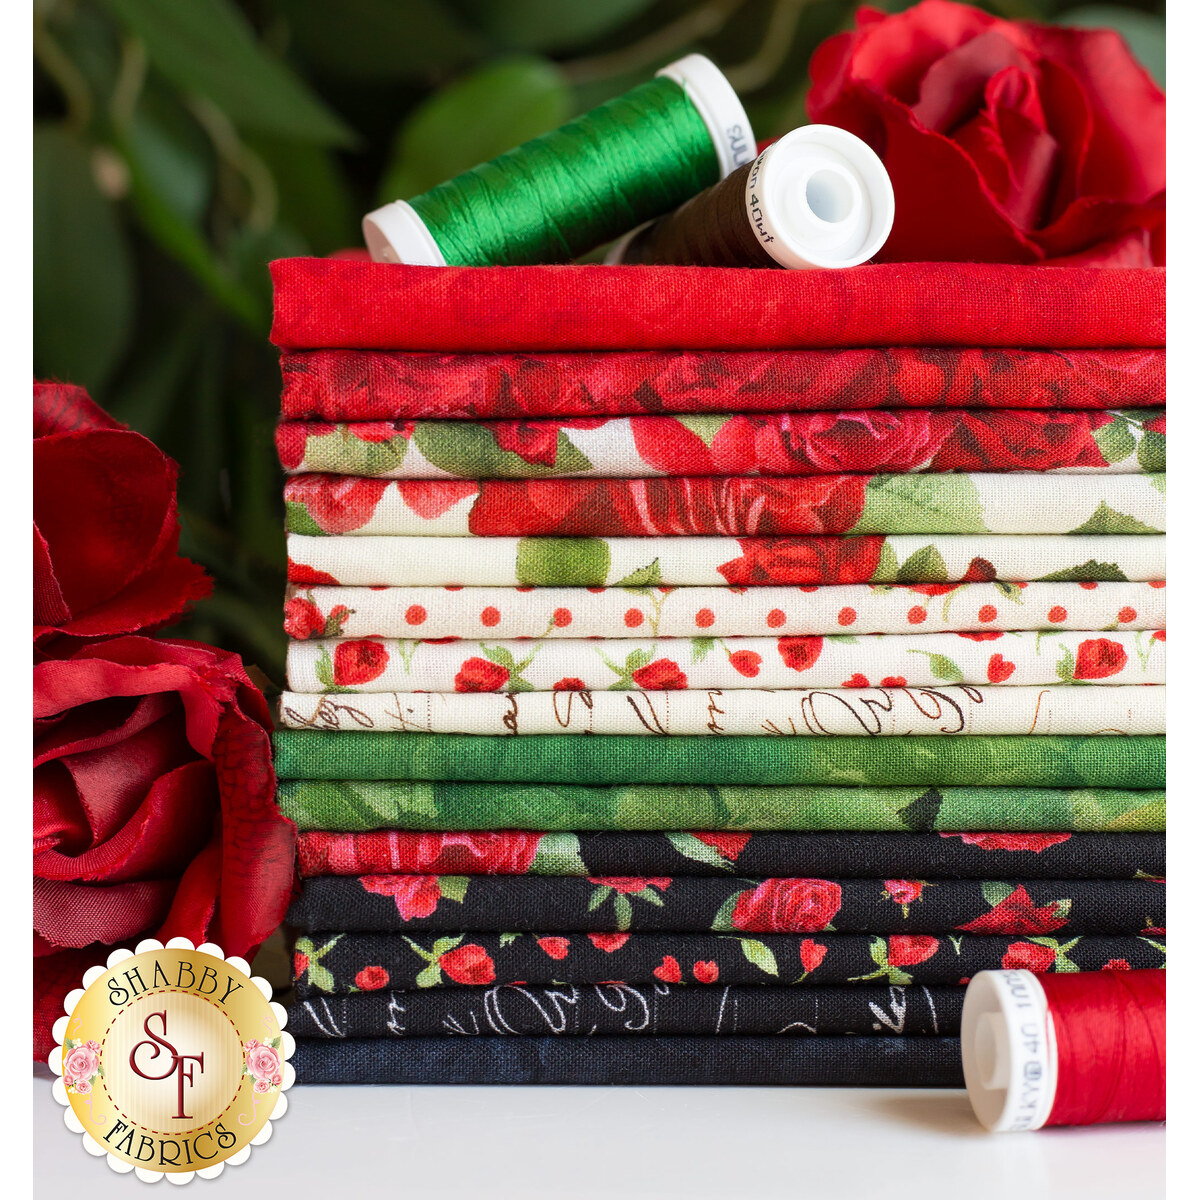 Vintage Rose Wrapping Paper - Vintage Wrapping Paper sold by